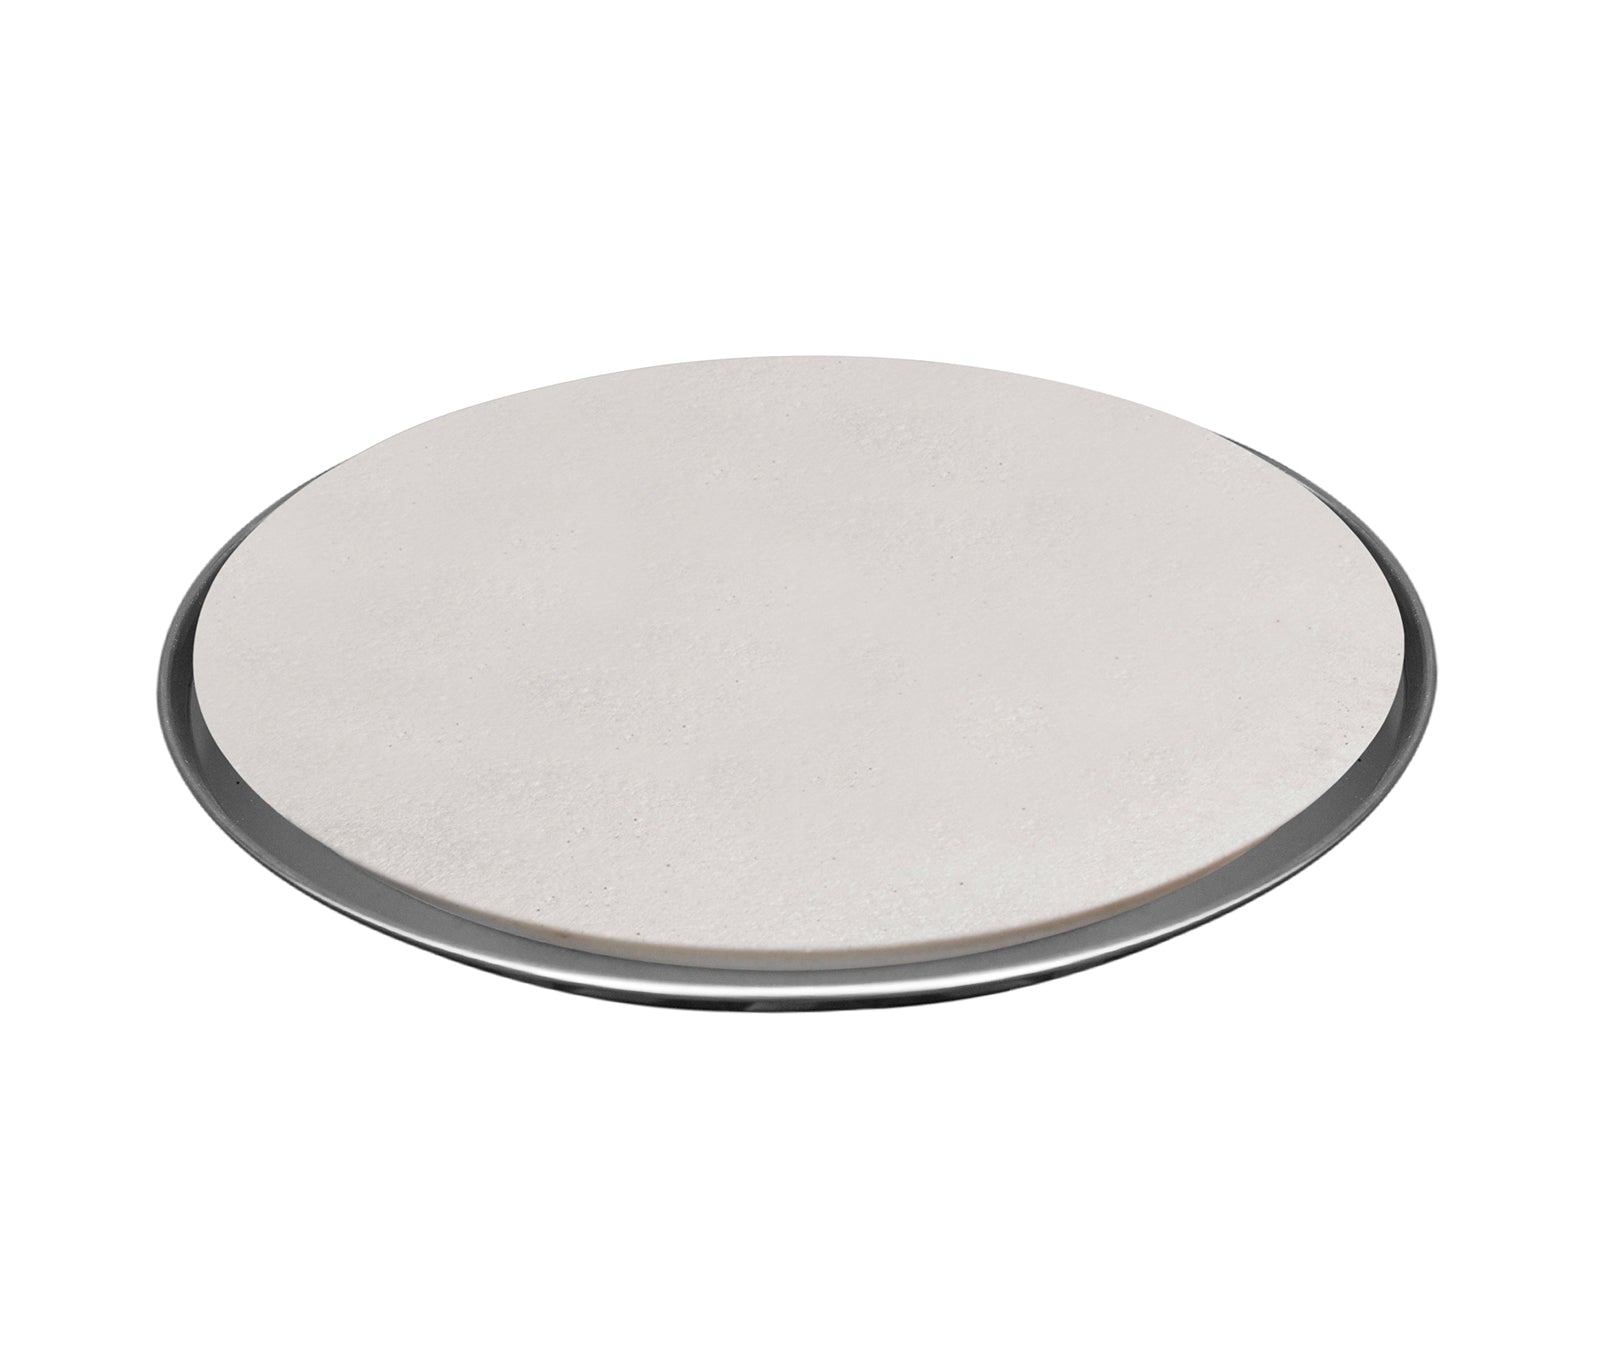 Home Barbecue Grill Baking Stone 17" Diameter